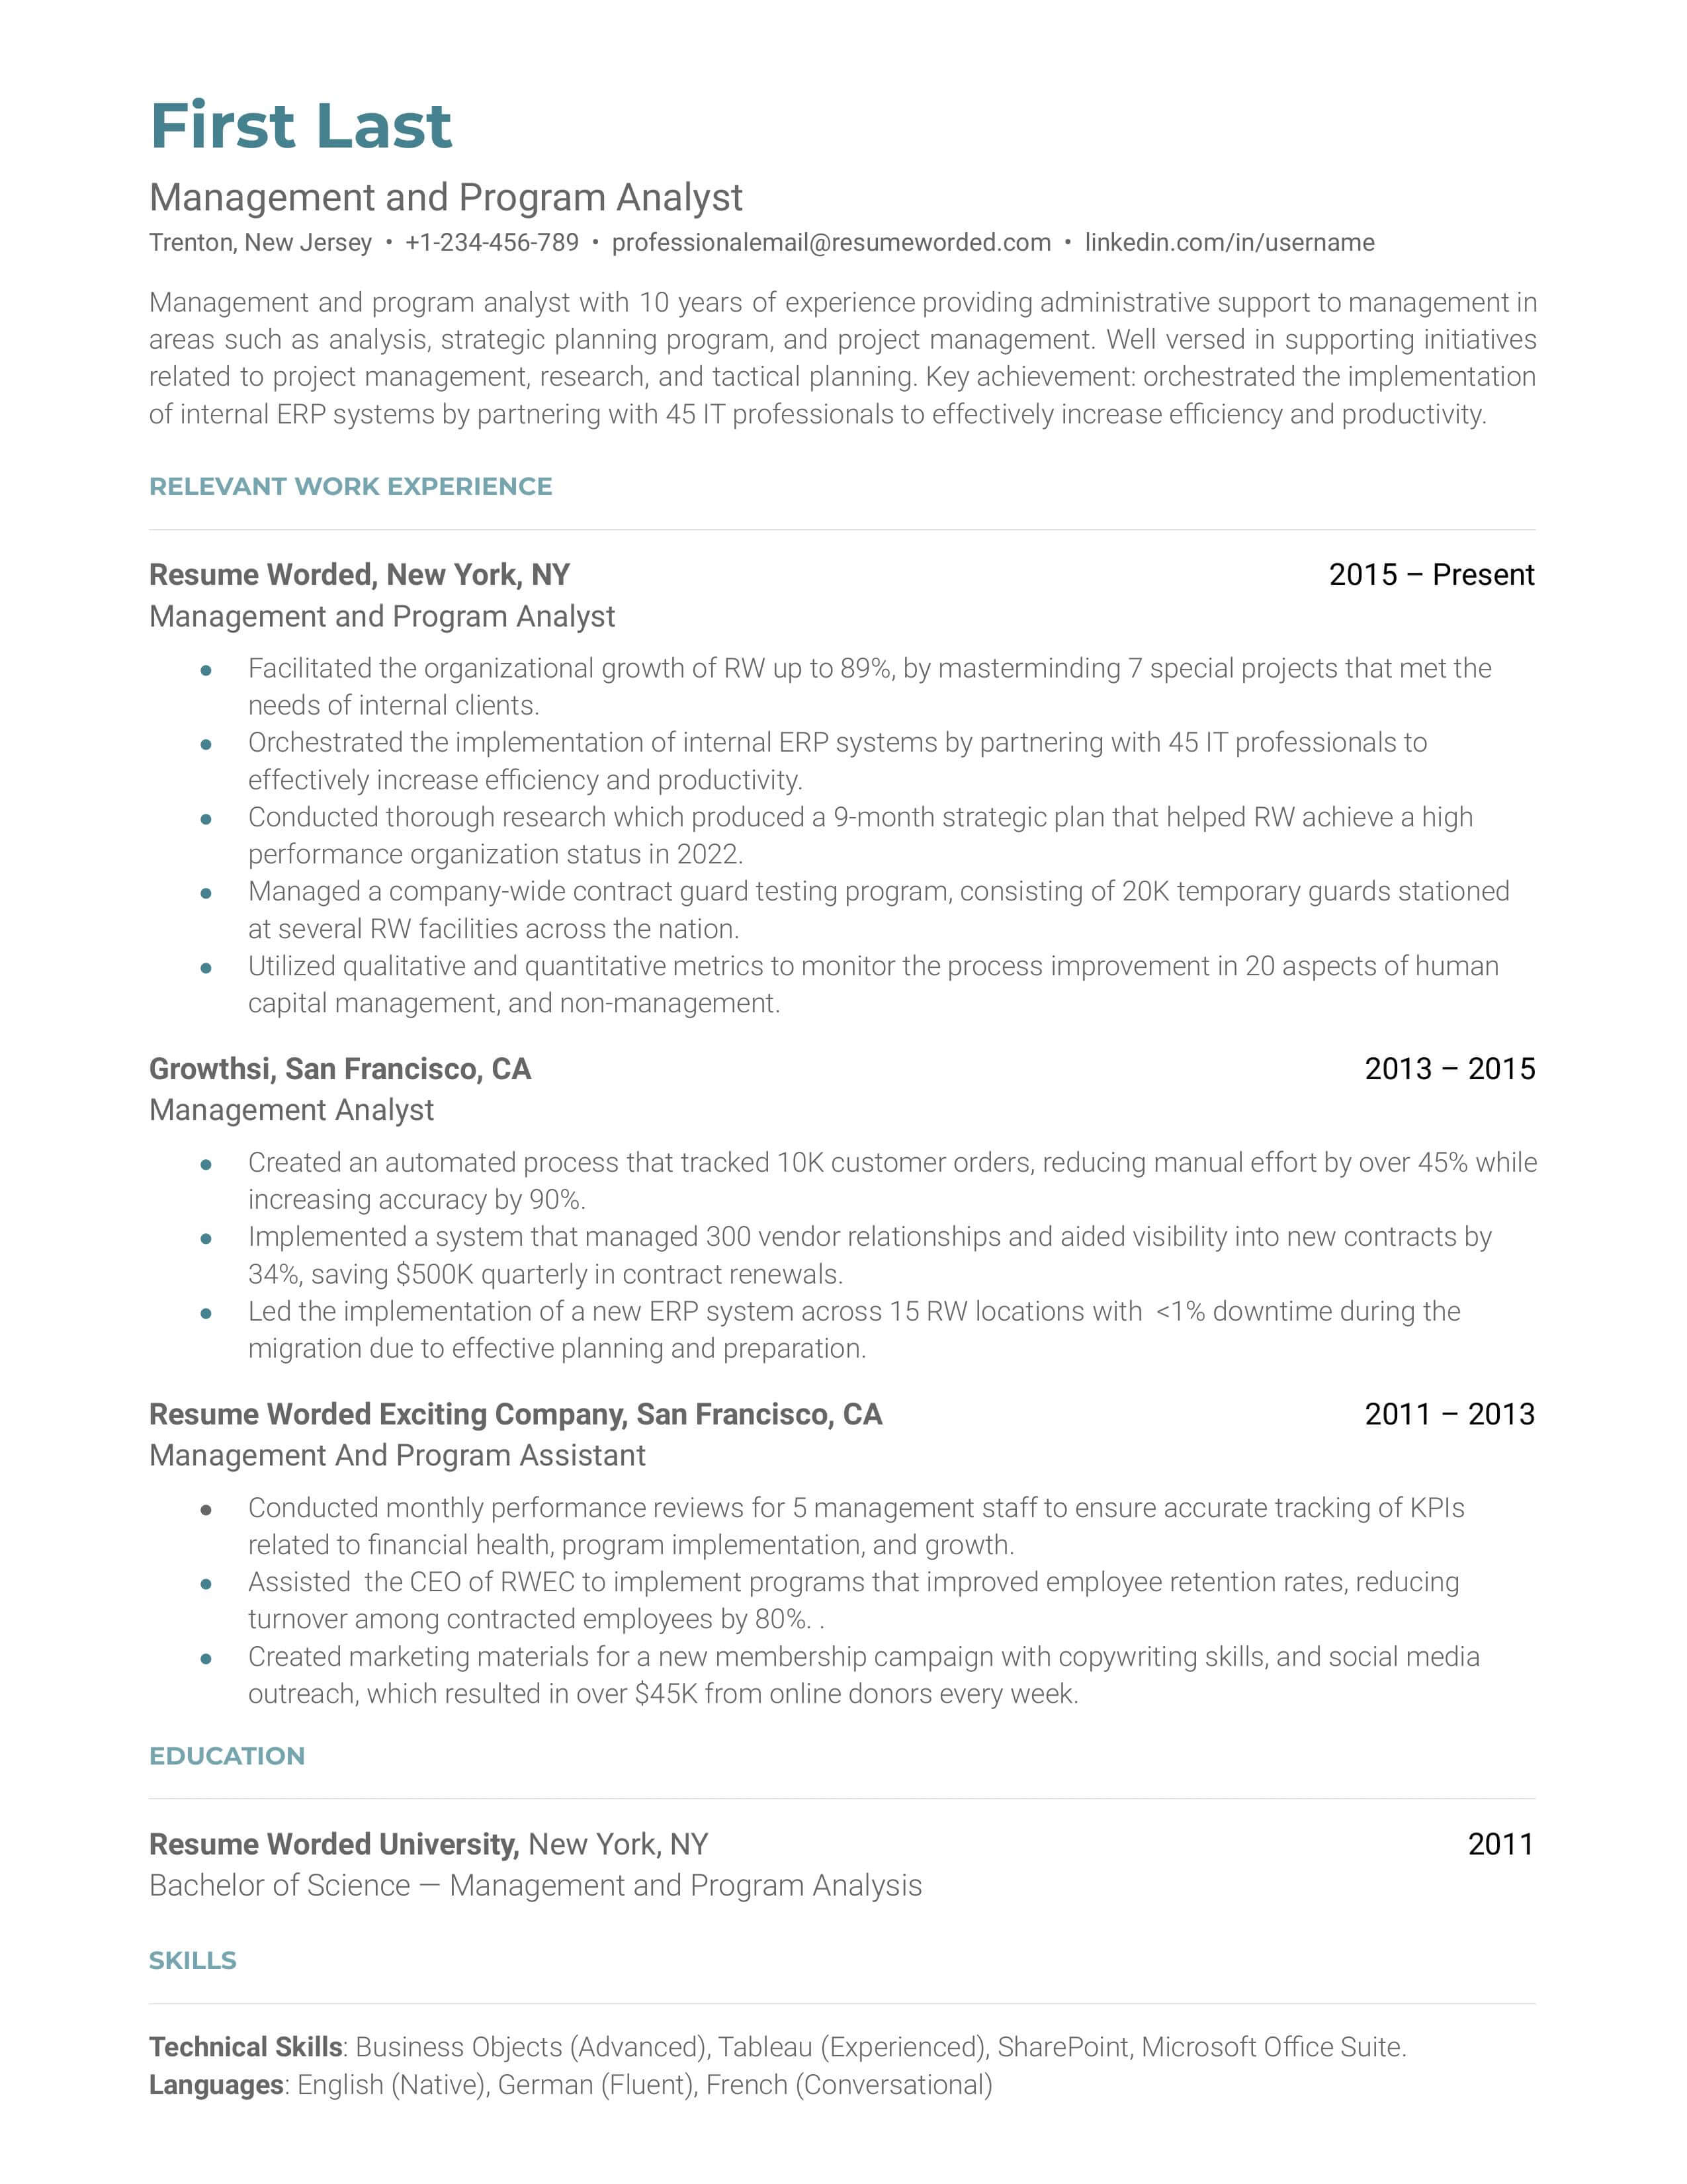 A management and program analyst resume example that emphasizes work experience